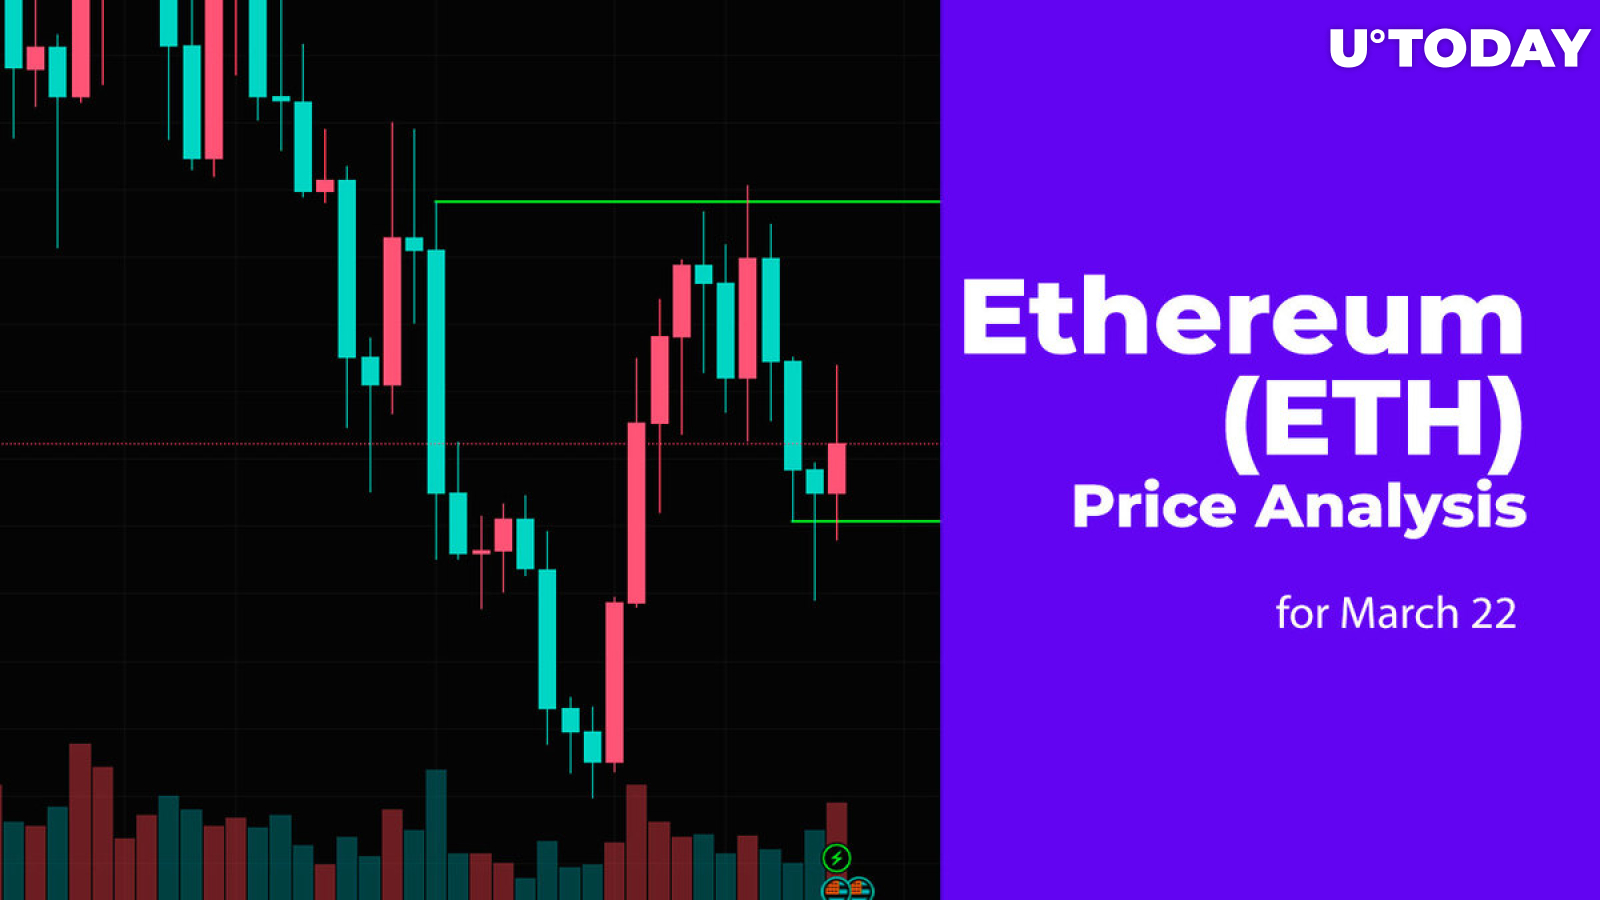 Ethereum (ETH) Price Analysis for March 22